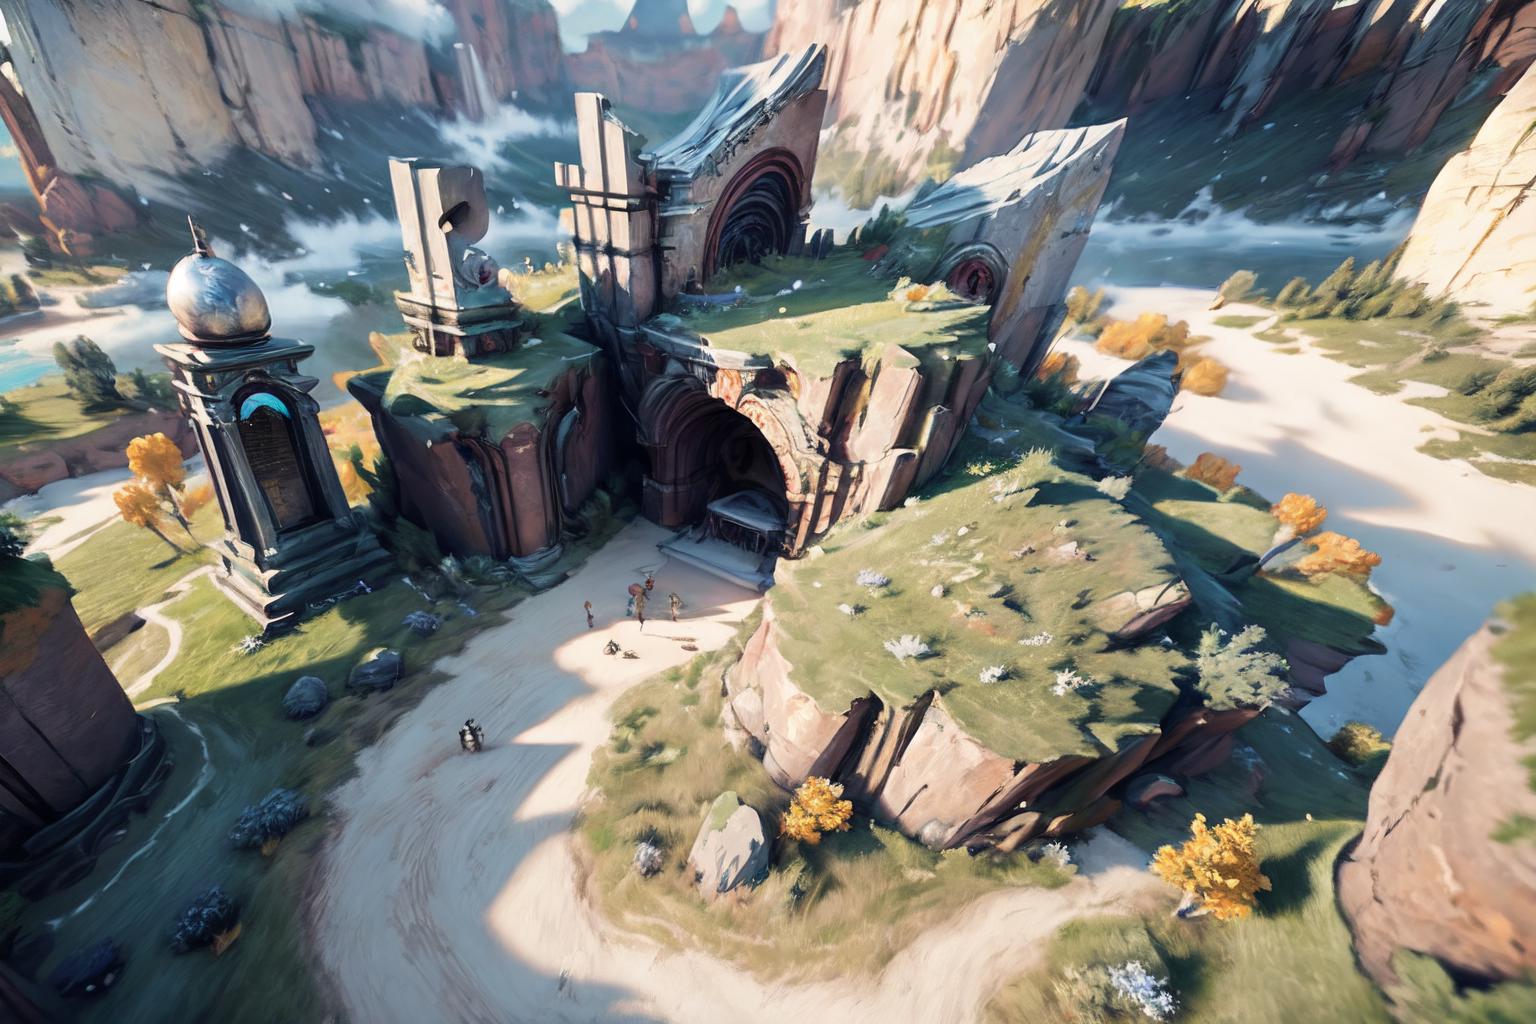 Stylized Ruins image by deatharms2010